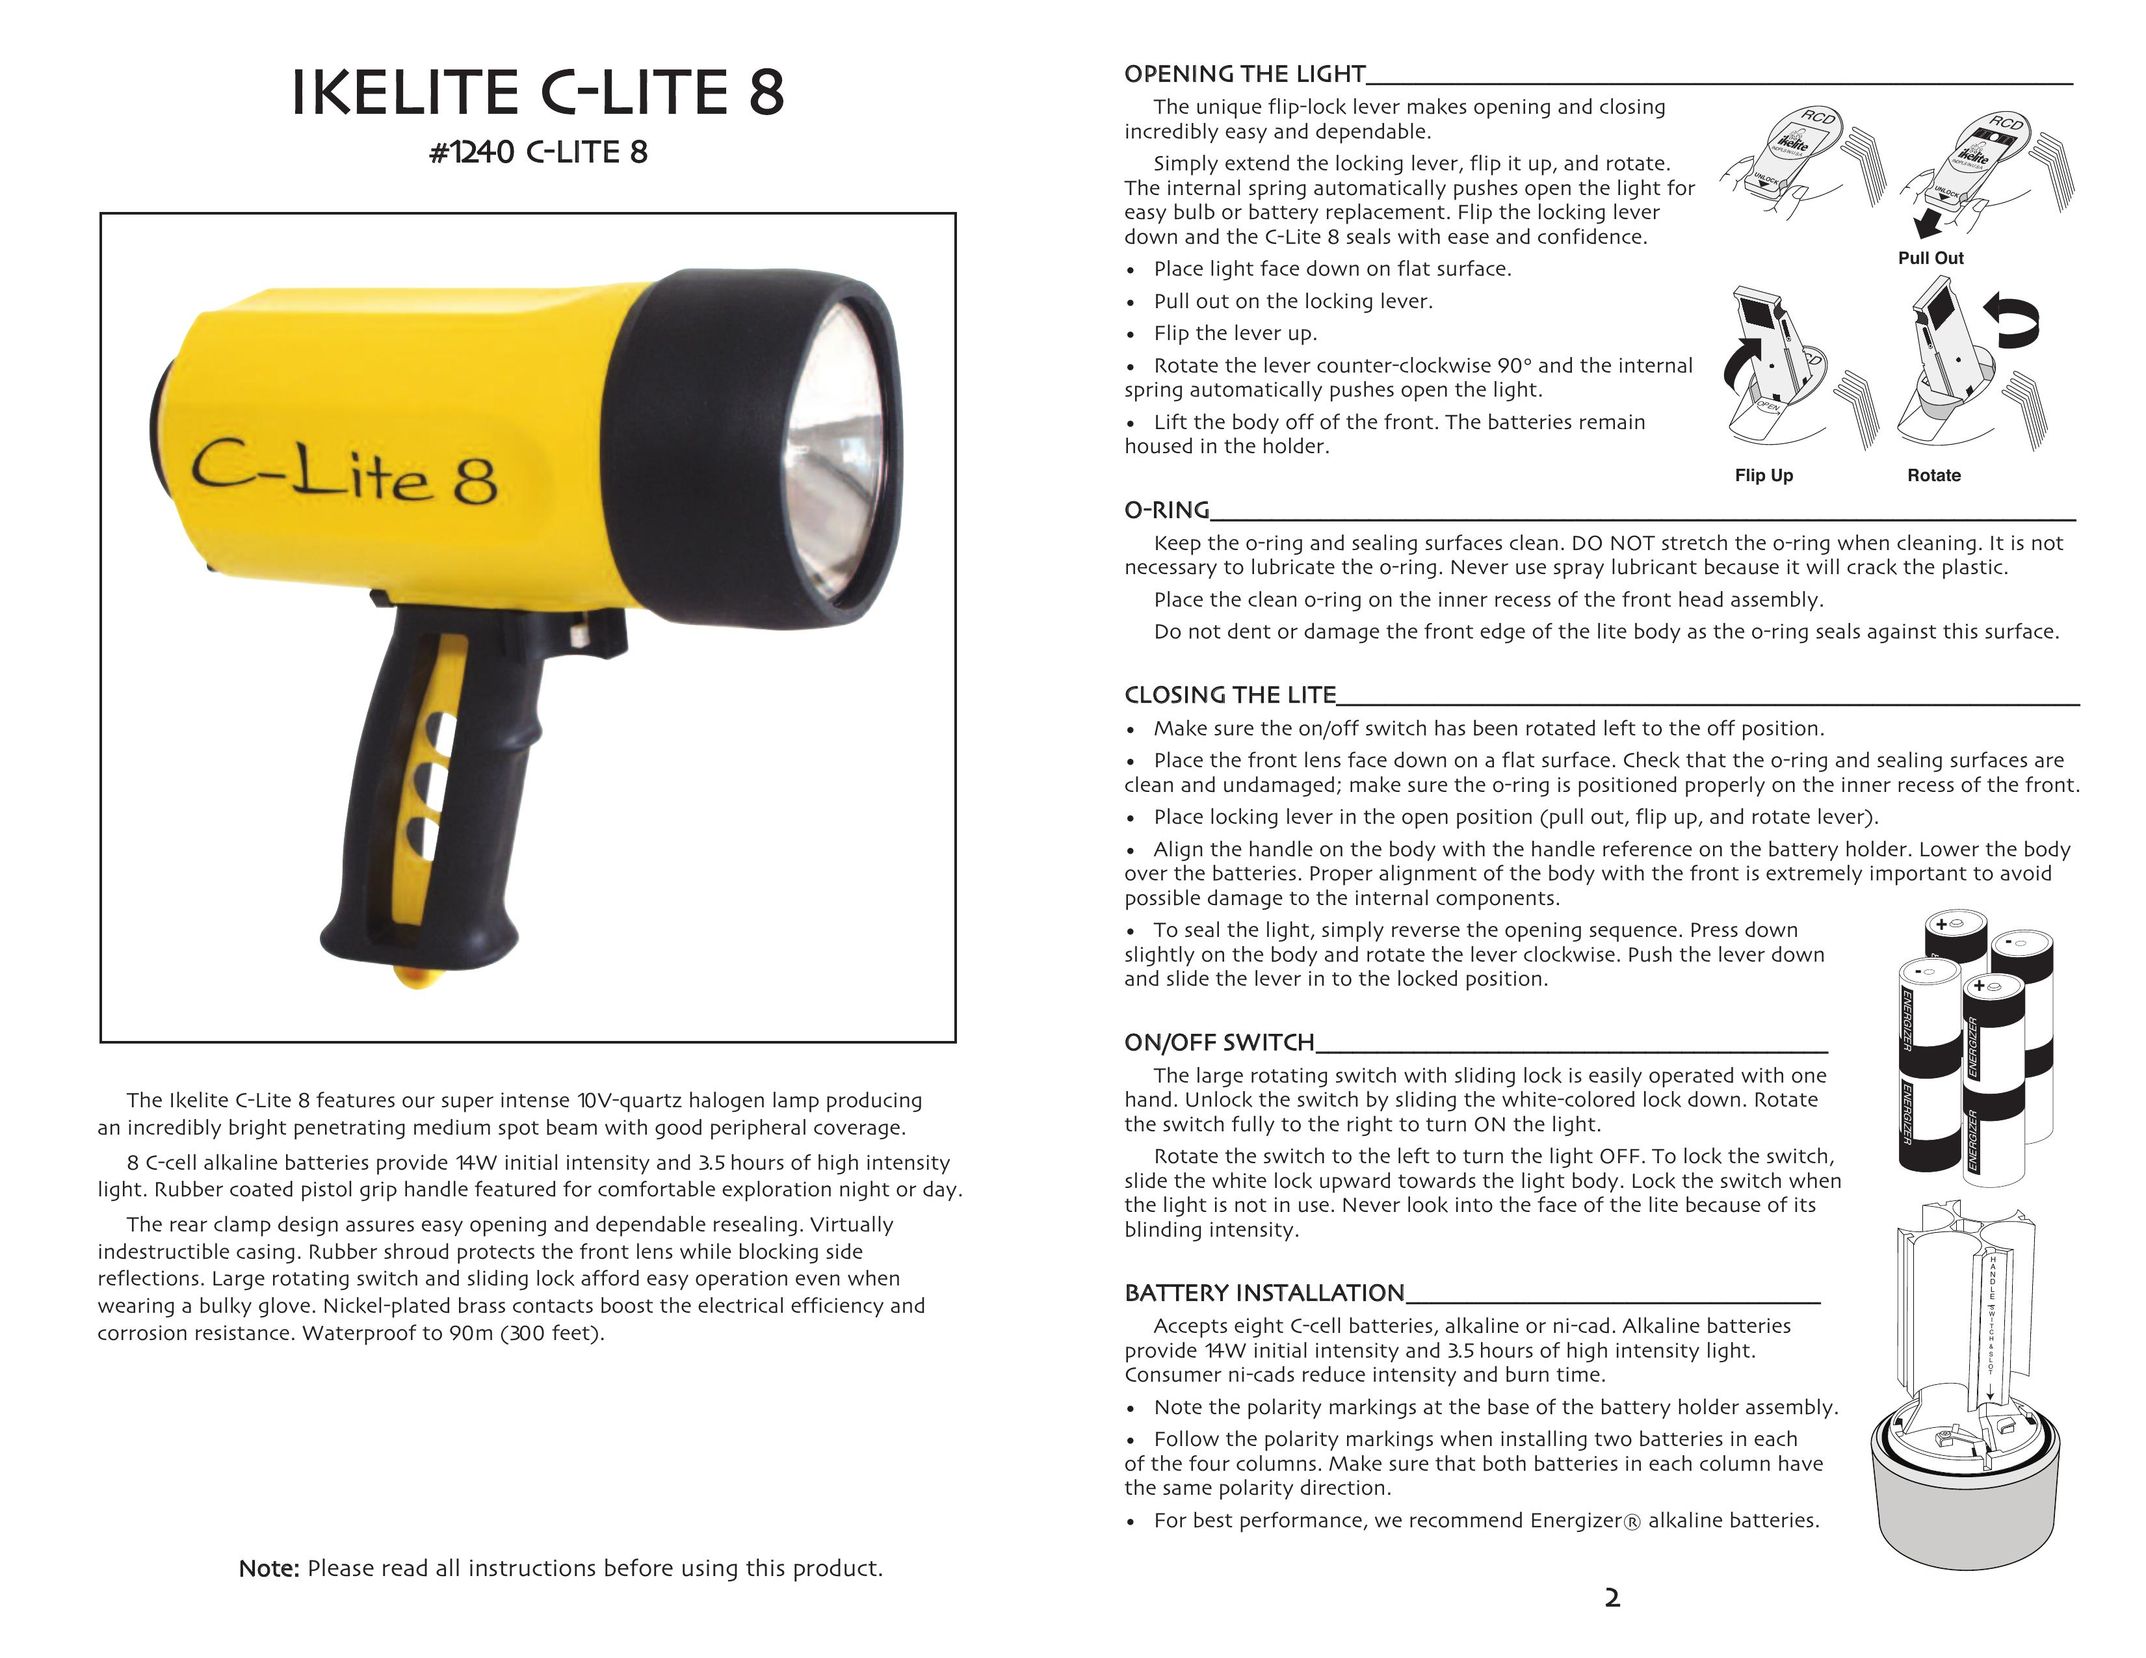 Ikelite C-Lite 8 Home Safety Product User Manual